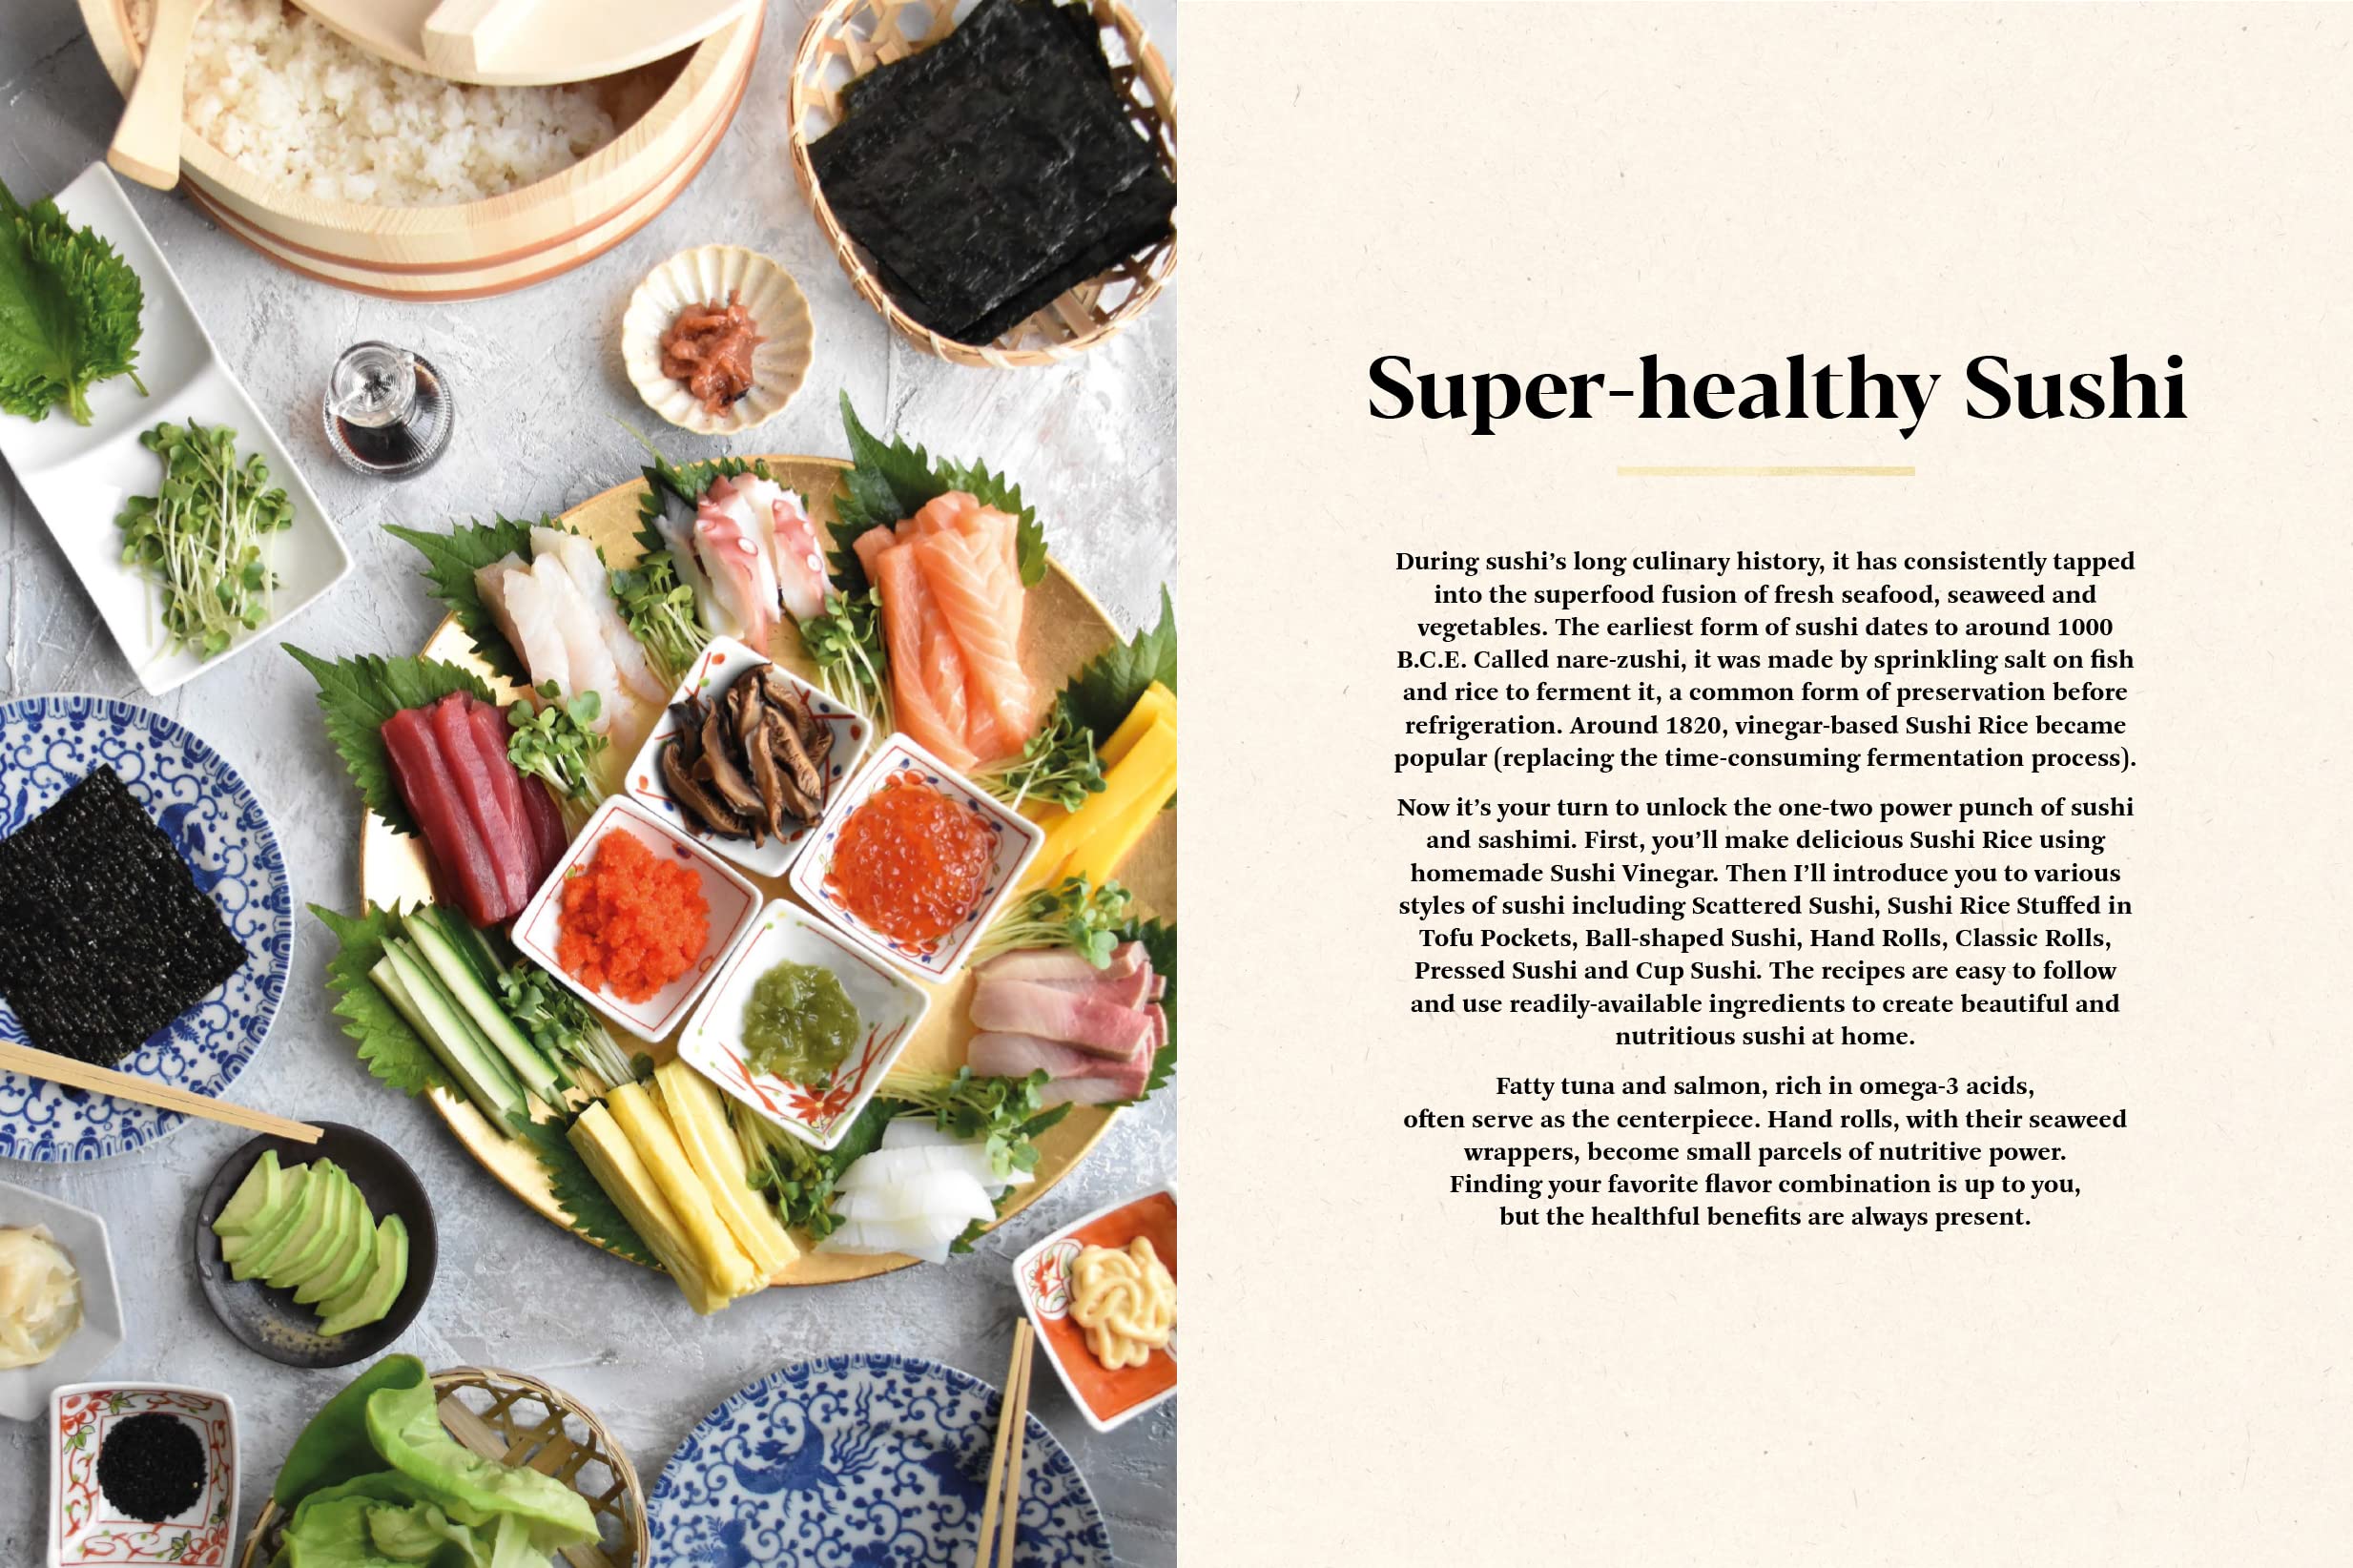 Japanese Superfoods: Learn the Secrets of Healthy Eating and Longevity - the Japanese Way (Yumi Komatsudaira) *Signed*